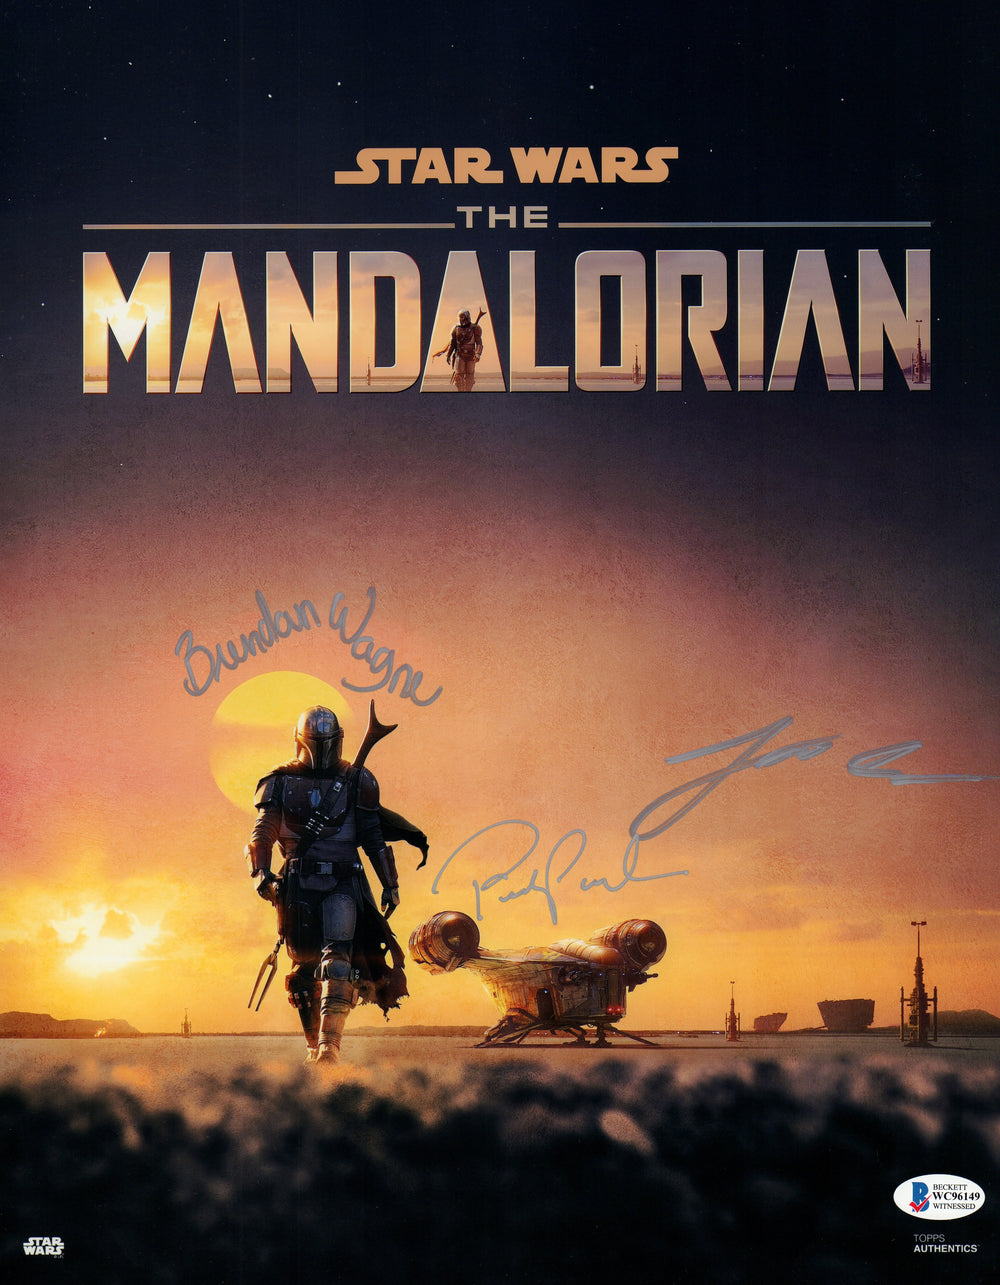 Pedro Pascal, Lateef Crowder, and Brendan Wayne as the Mandalorian in Star Wars: The Mandalorian (Beckett Witnessed) Signed 11x14 Photo